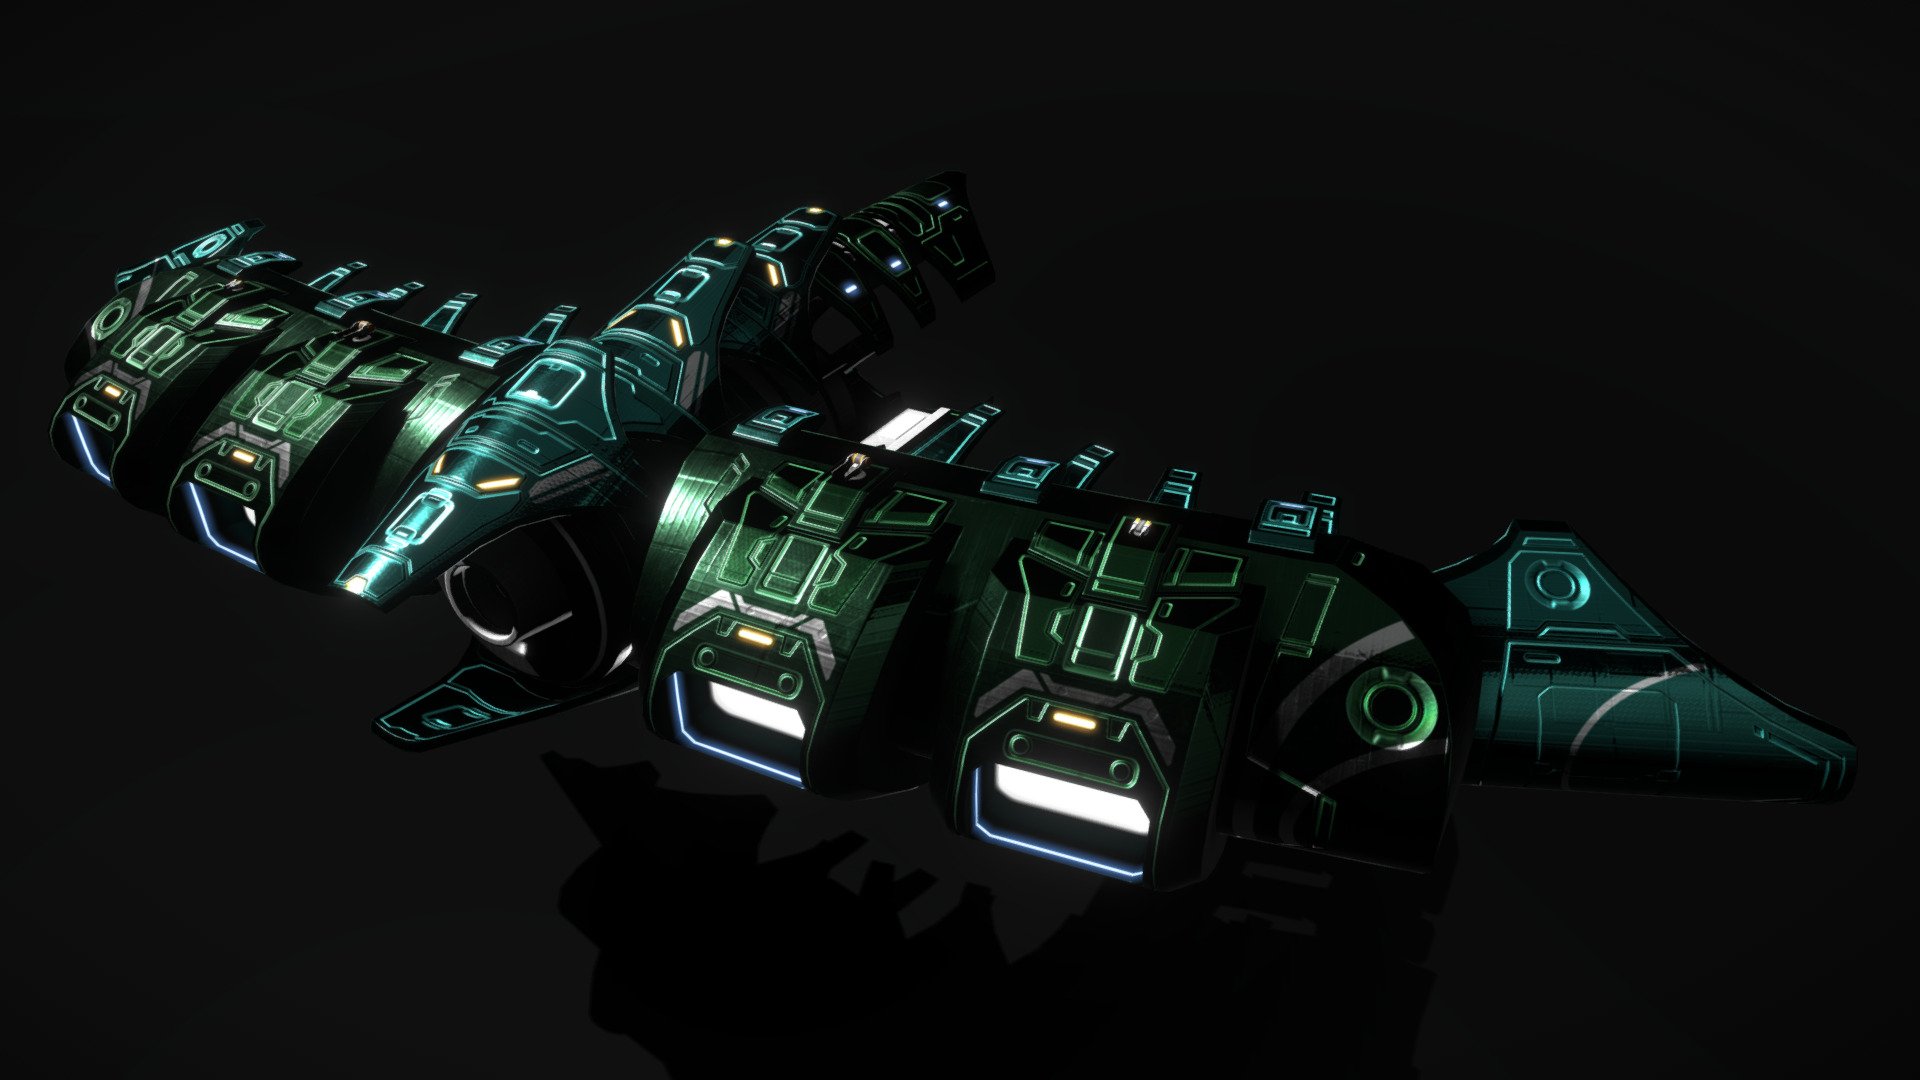 This is a model of a low-poly and game-ready scifi spaceship. 

The weapons are separate meshes and can be animated with a keyframe animation tool. The weapon loadout can be changed too.

The model comes with several differently colored texture sets. The PSD file with intact layers is included.

Please note: The textures in the Sketchfab viewer have a reduced resolution to improve Sketchfab loading speed.

If you have bought this model please make sure to download the “additional file”.  It contains FBX and OBJ meshes, full resolution textures and the source PSDs with intact layers. The meshes are separate and can be animated (e.g. firing animations for gun barrels, rotating turrets, etc) 3d model